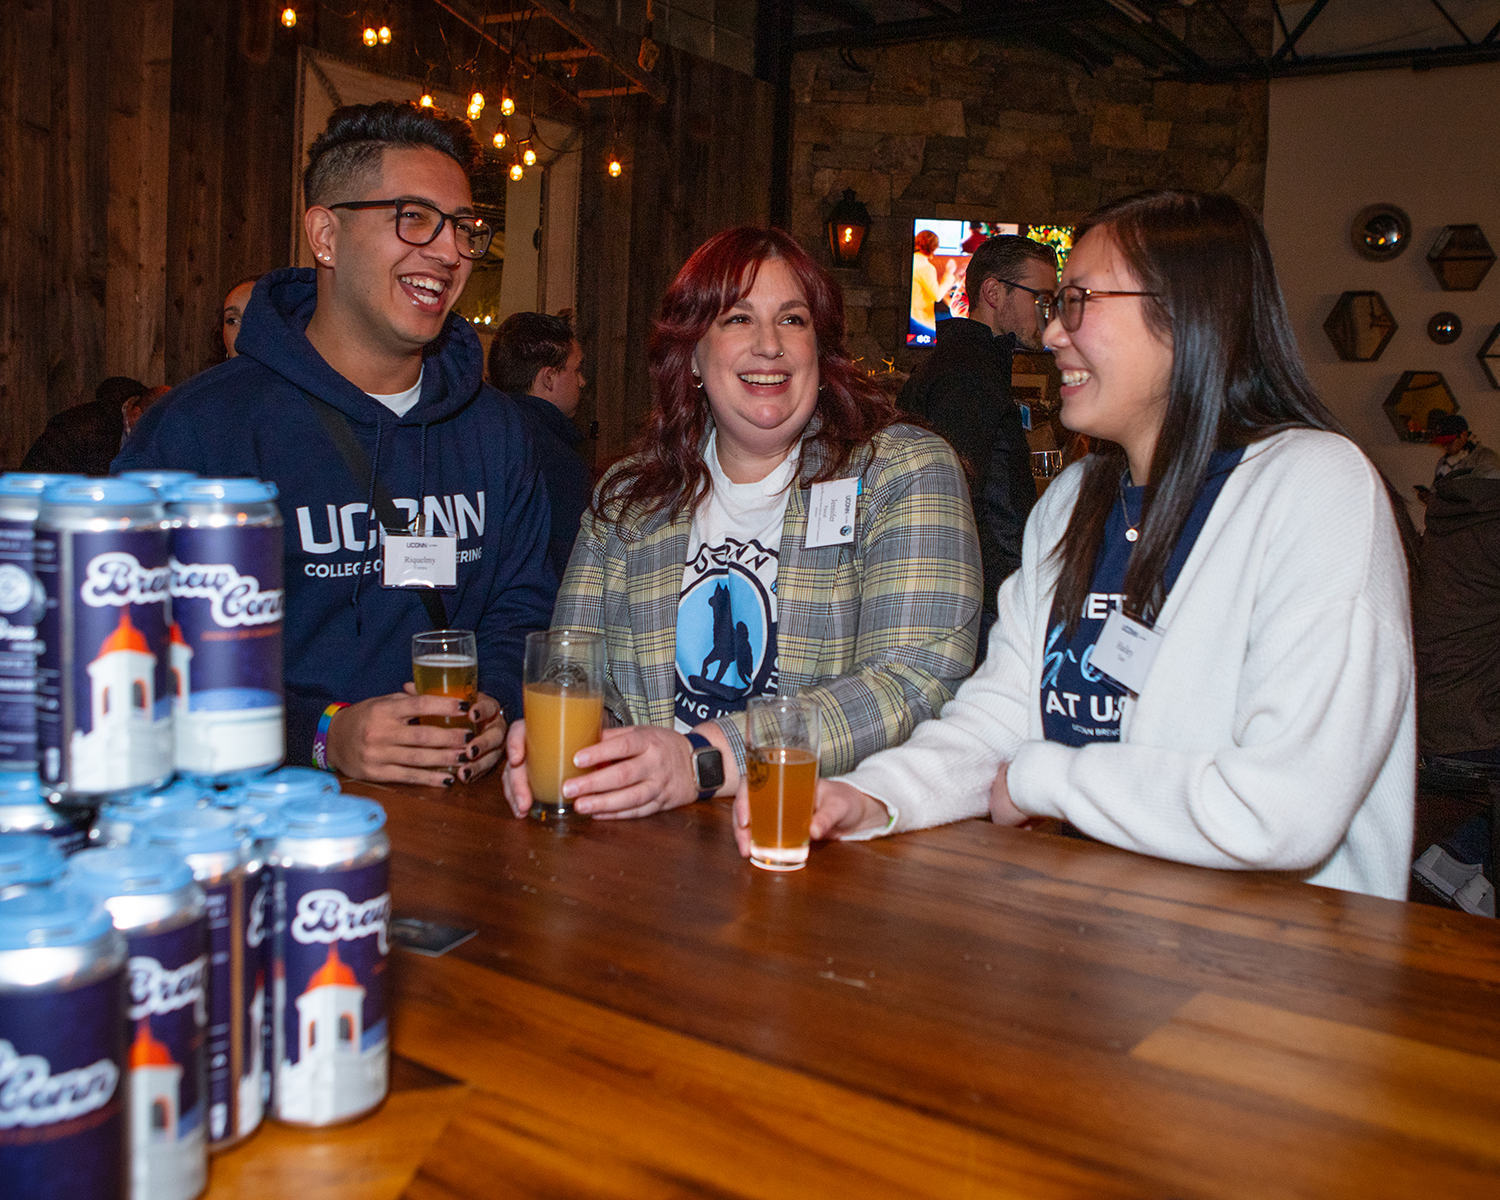 Jordan Aeschlimann, Riquelmy Torres, and Hailey Tam at the 1881 series foundation brewery event.